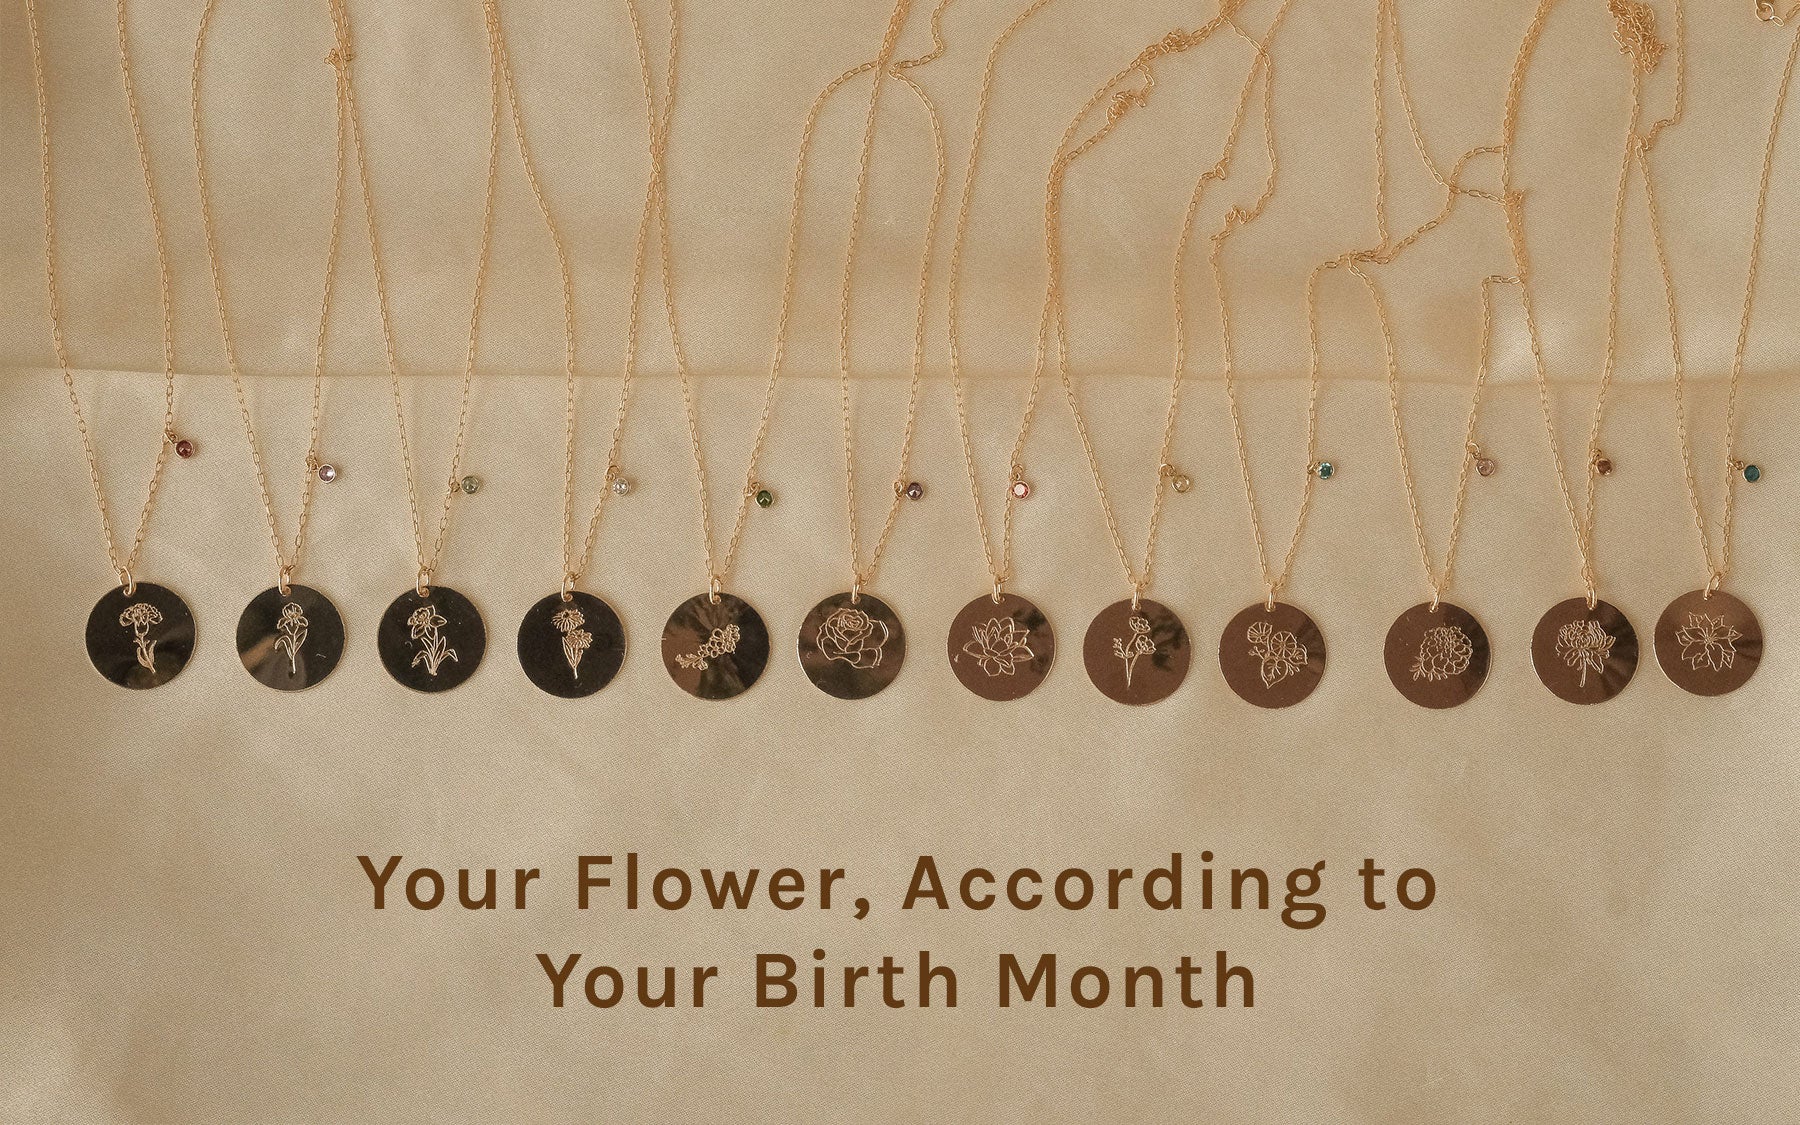 Your Flower According to Your Birth Month